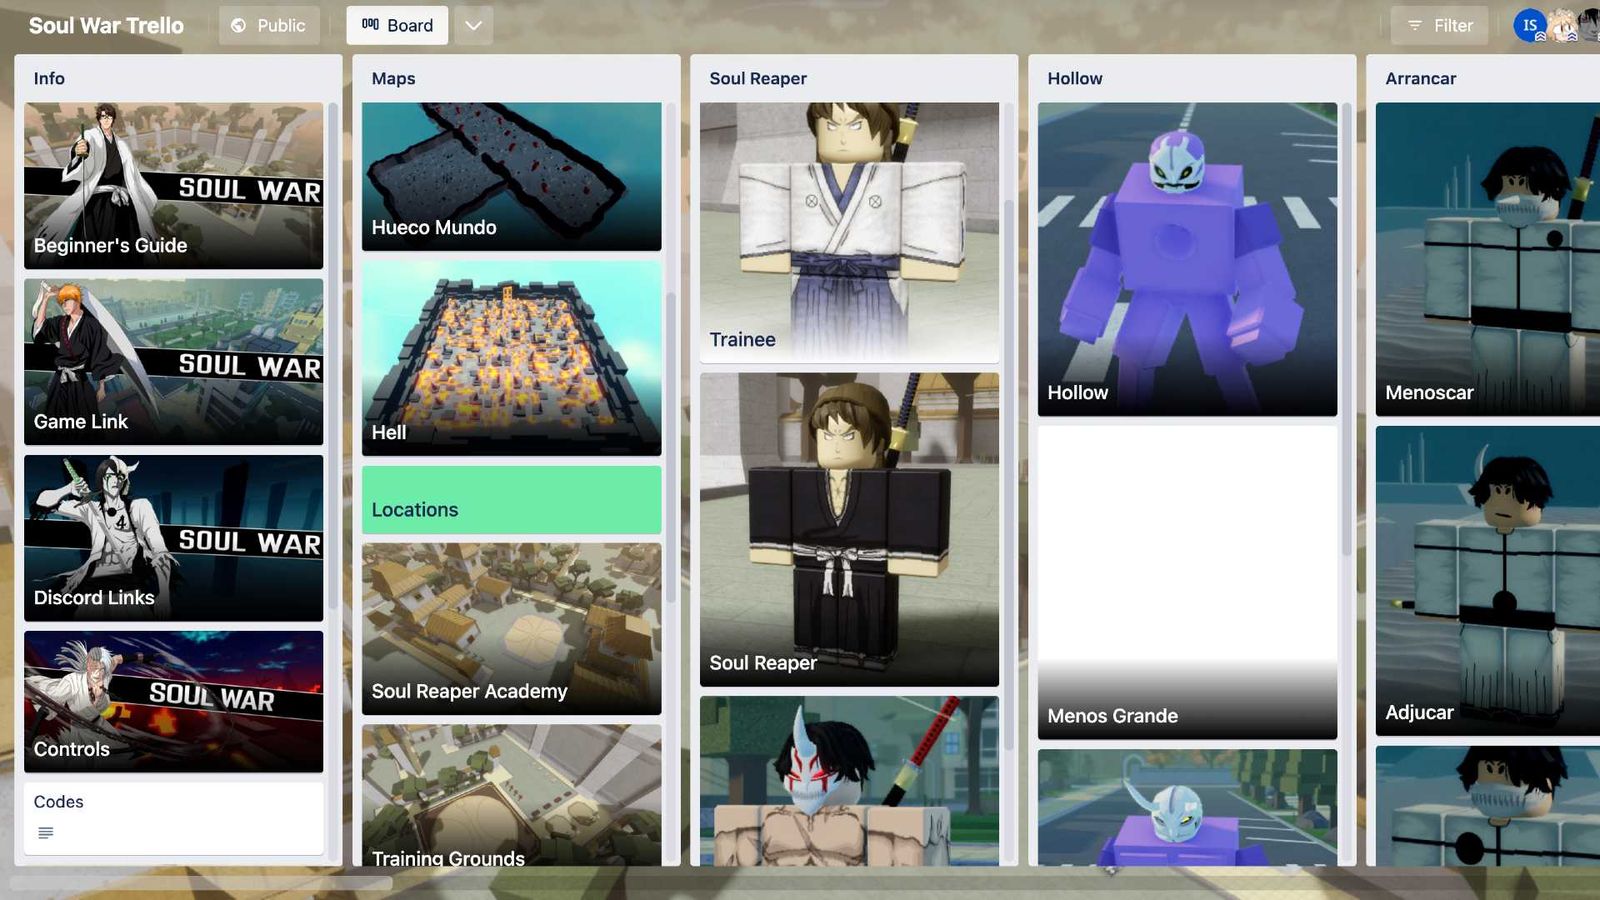 Image of the Soul War Trello board with five columns.